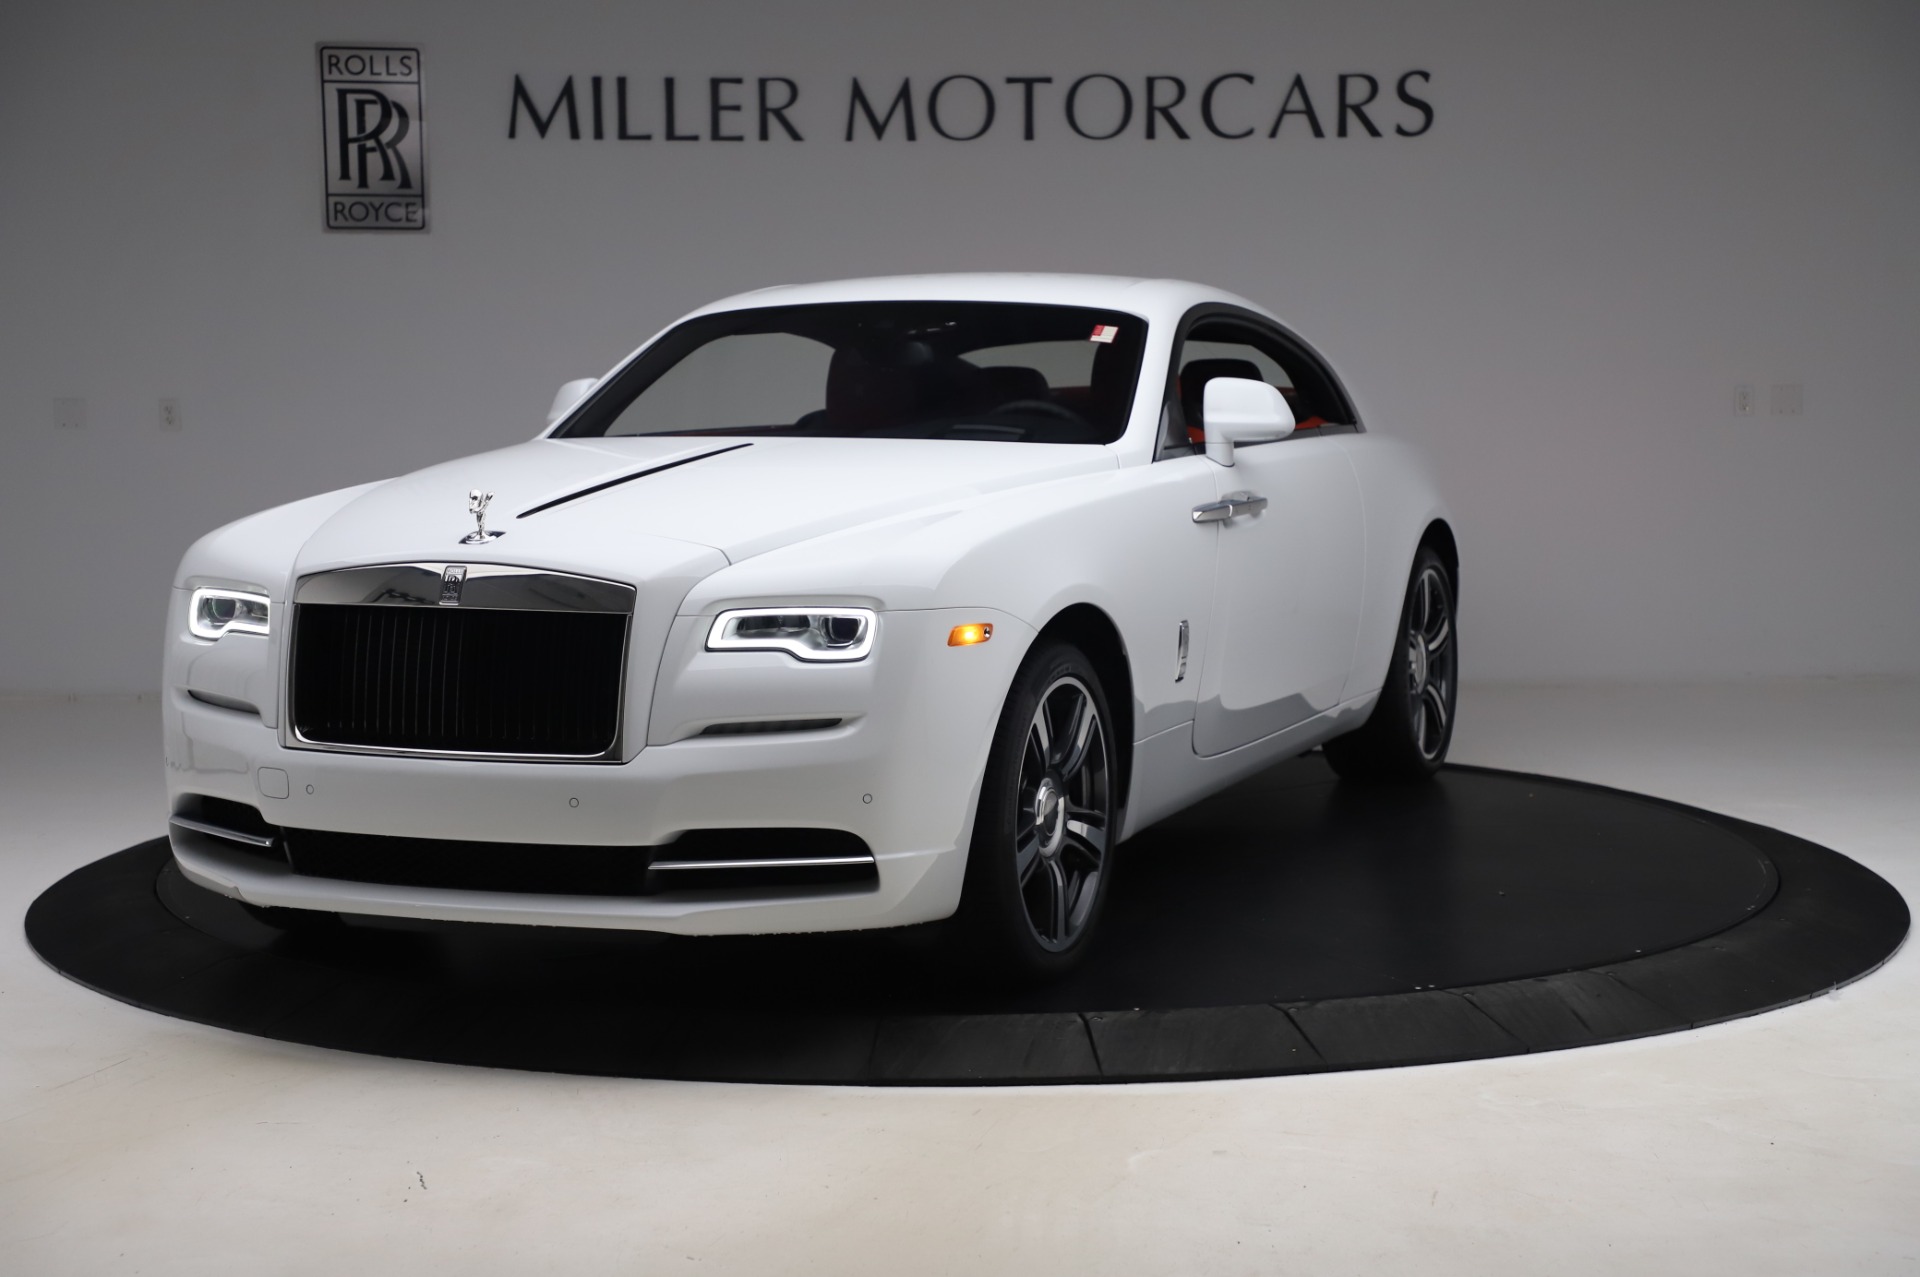 New Rolls Royce Wraith Tester Hints at Sportier Model  Carscoops